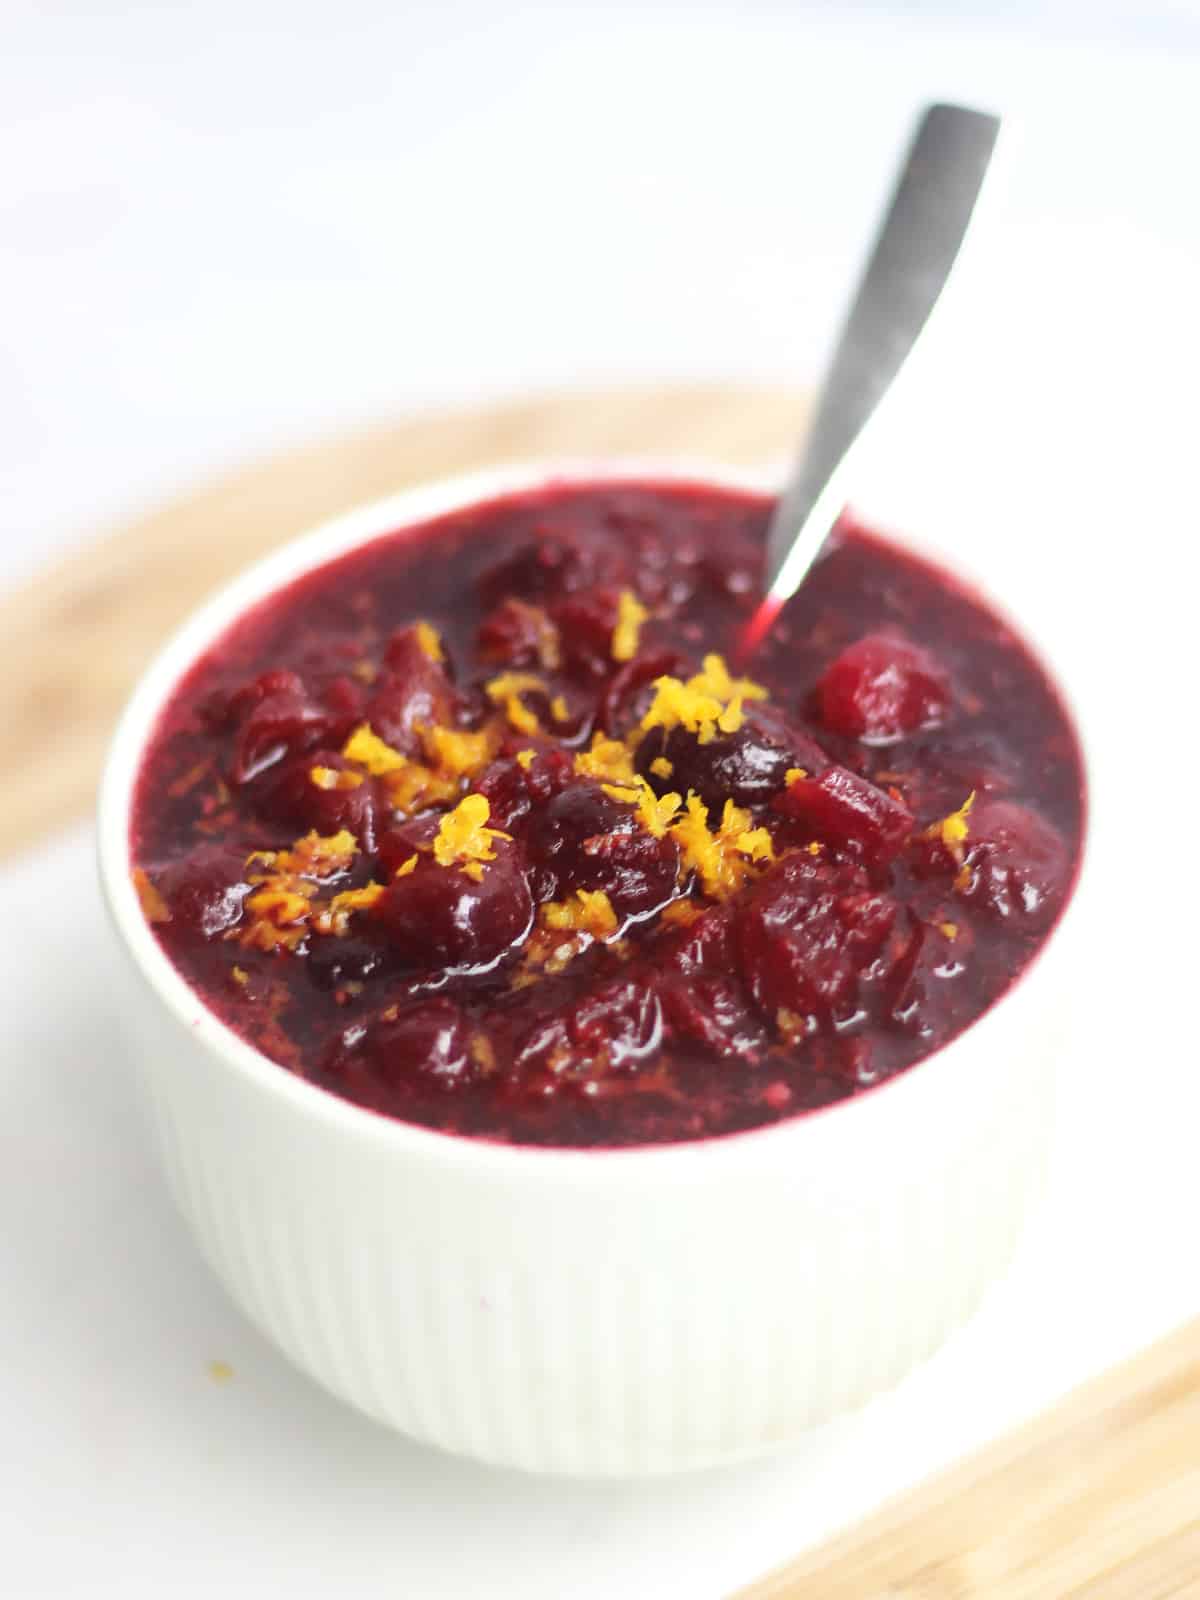 Whiskey cranberry sauce in a small bowl with grated orange zest.